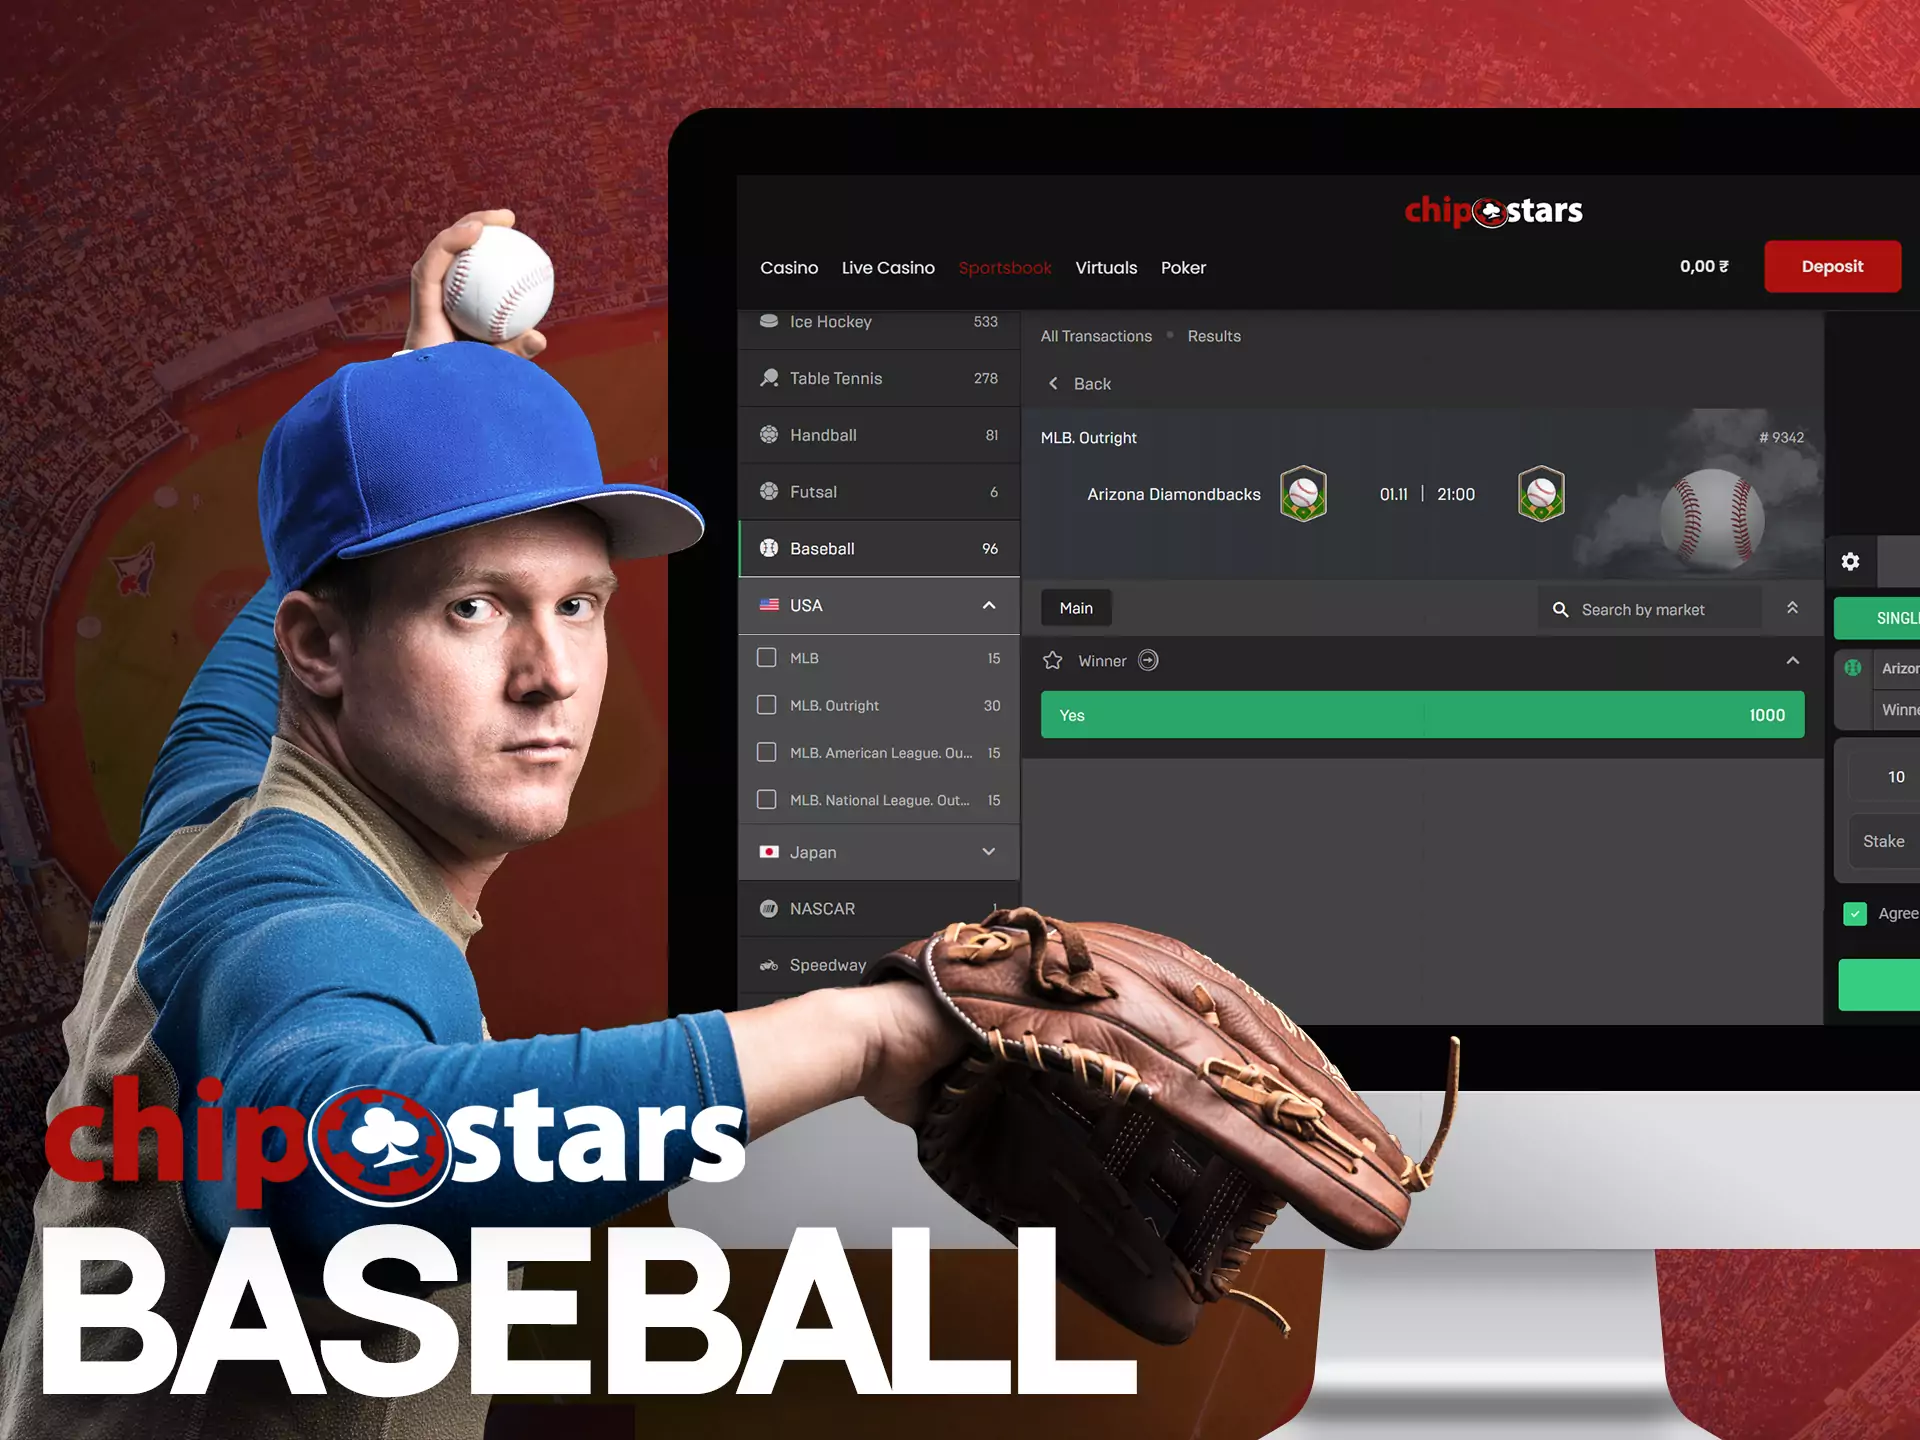 In the line and live sections, you find all the available baseball matches on Chipstars.